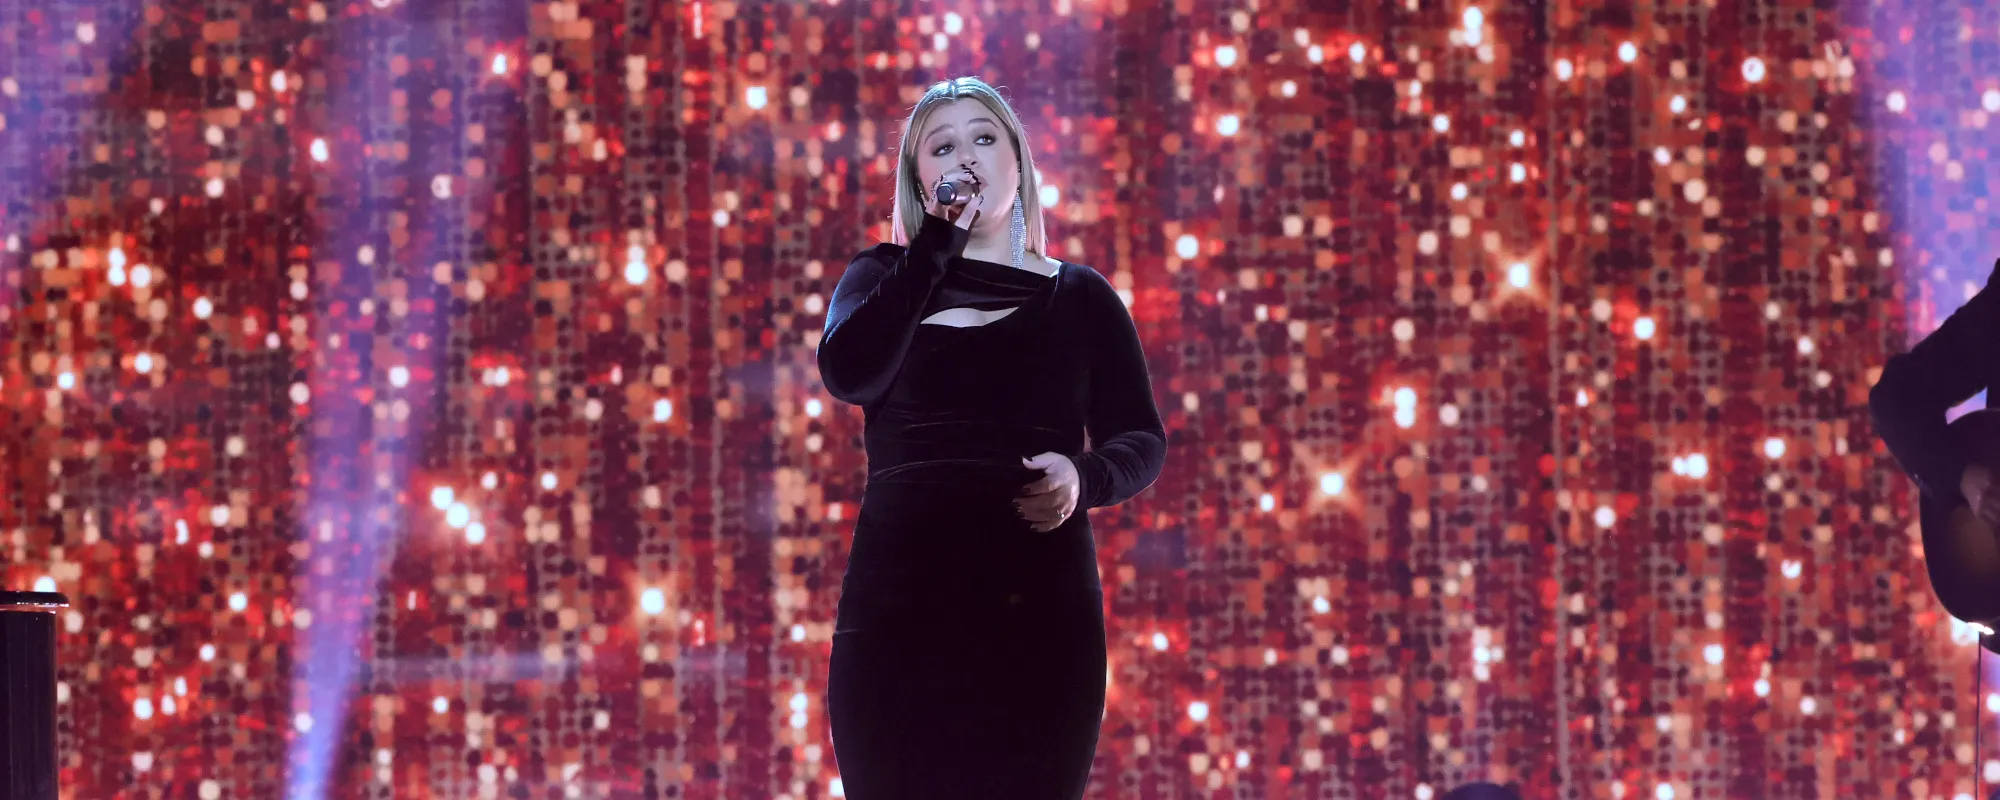 Kelly Clarkson Cover Taylor Swift, Fine Young Cannibals on Latest ‘Kellyoke’